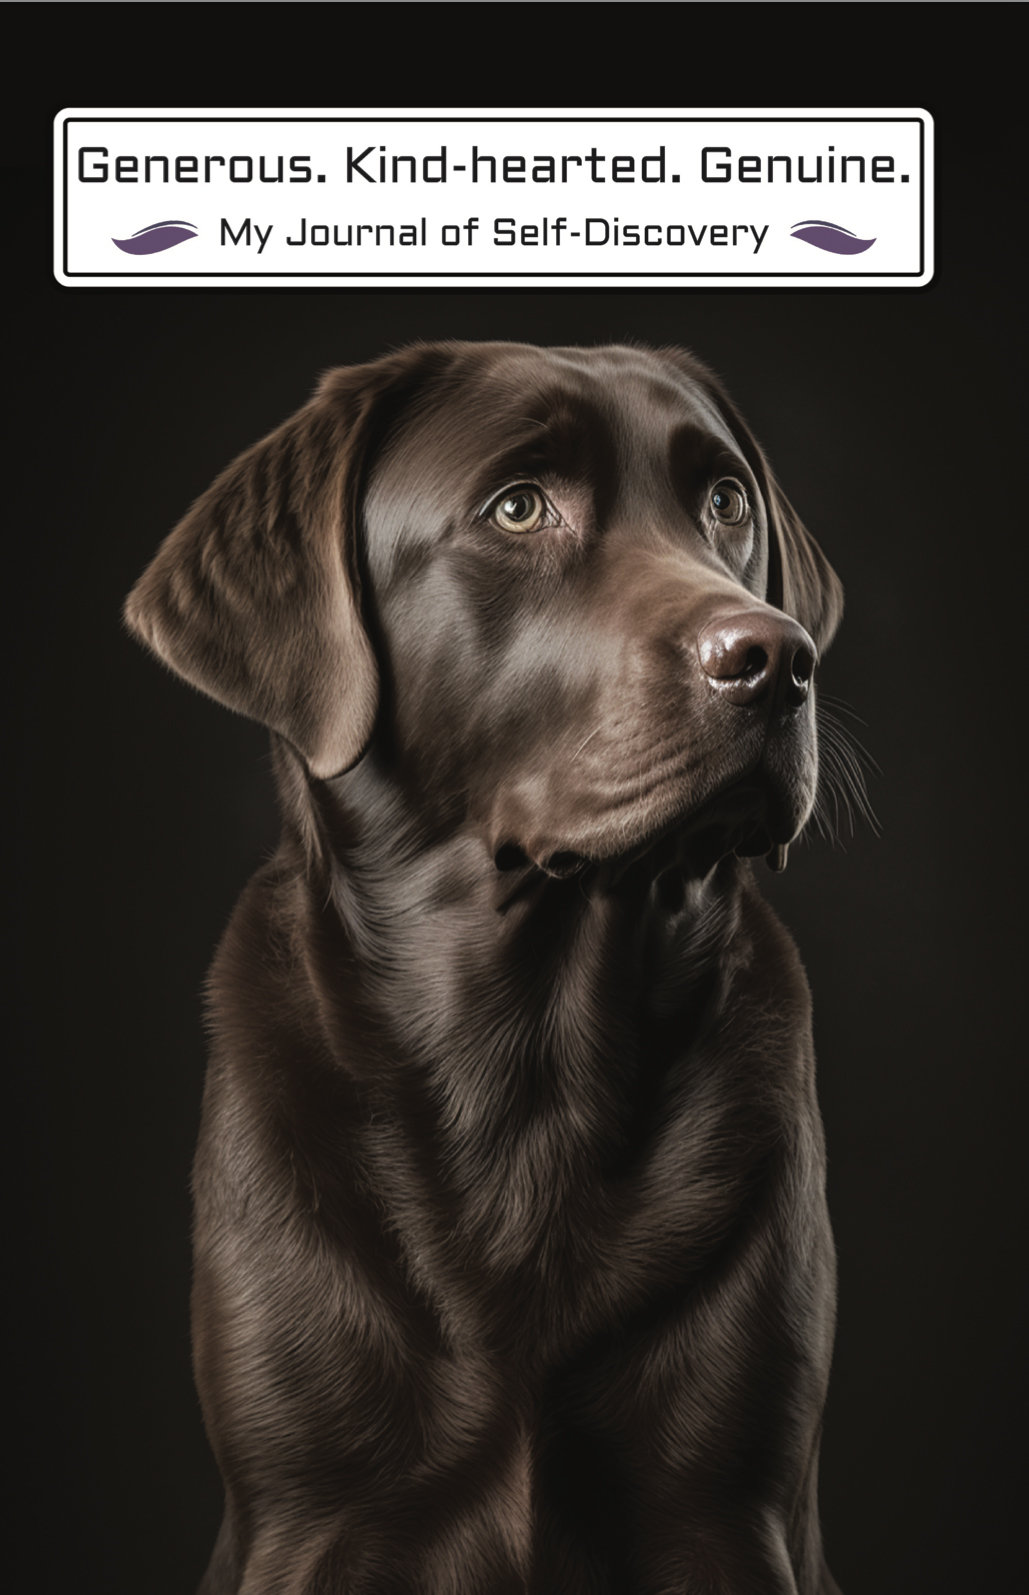 Image of a chocolate Labrador retriever on the front cover of this journal